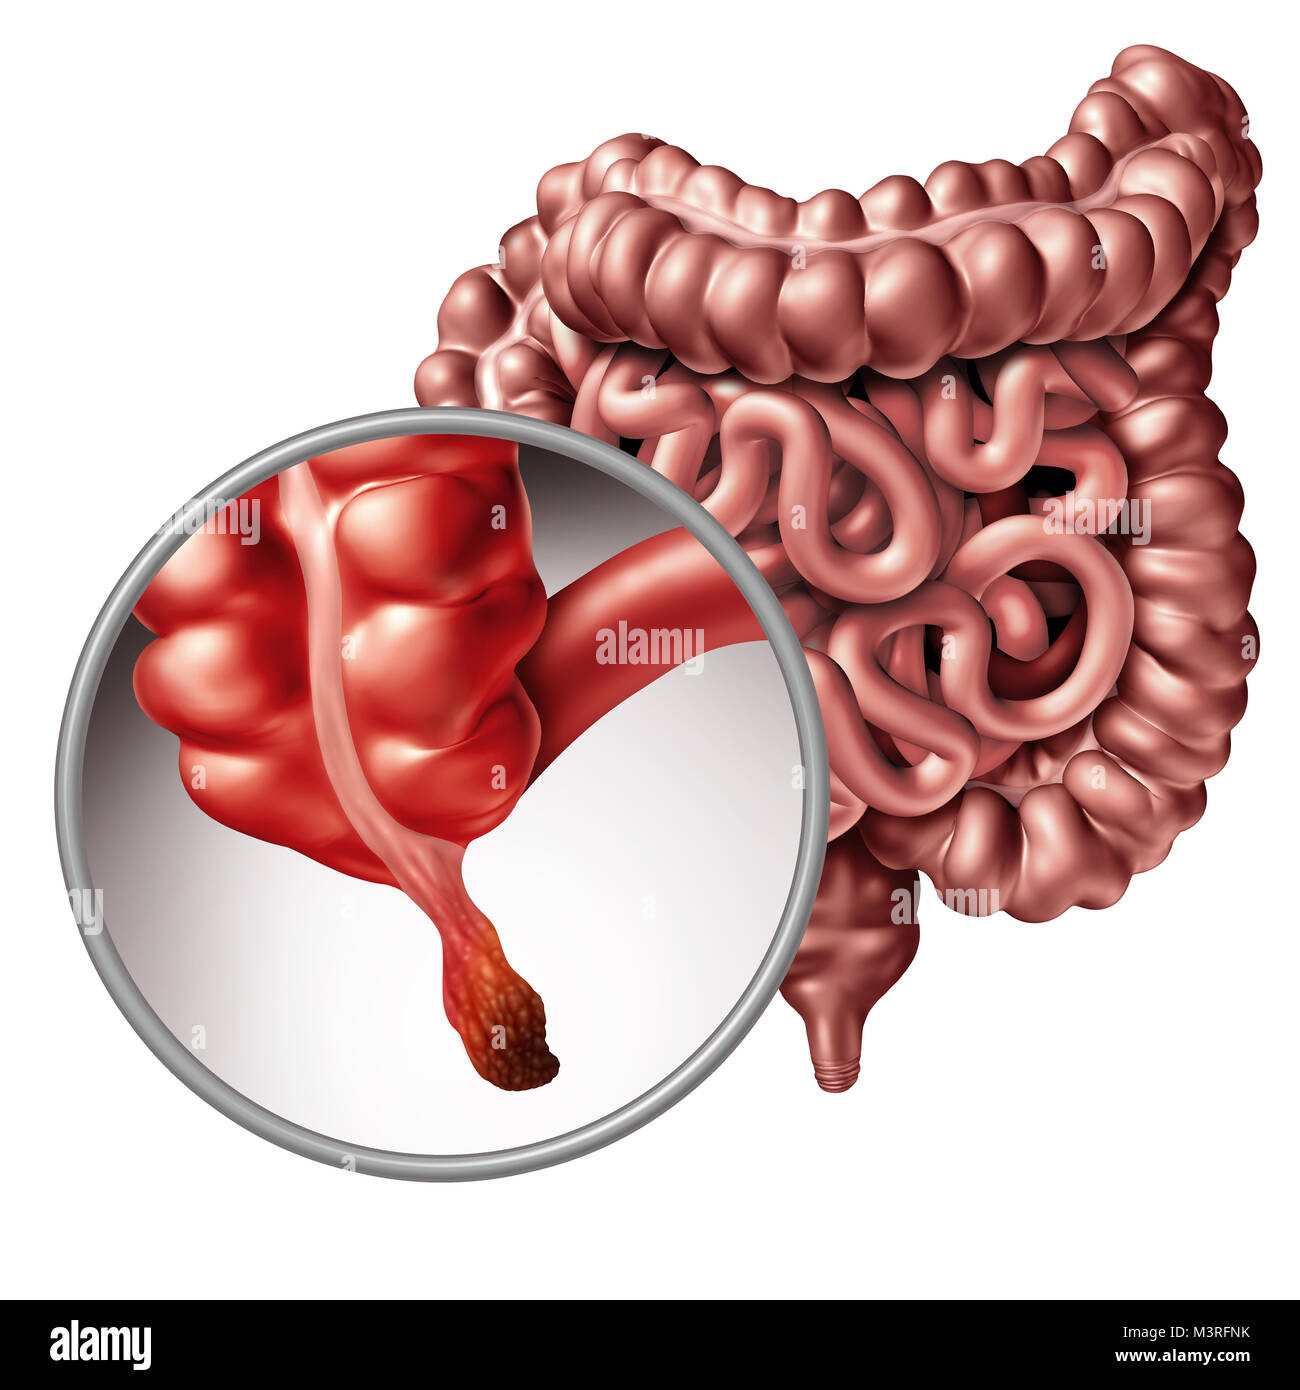 Appendicitis and appendix inflammation disease concept as a close up of human intestine anatomy as a 3D illustration. Stock Photo